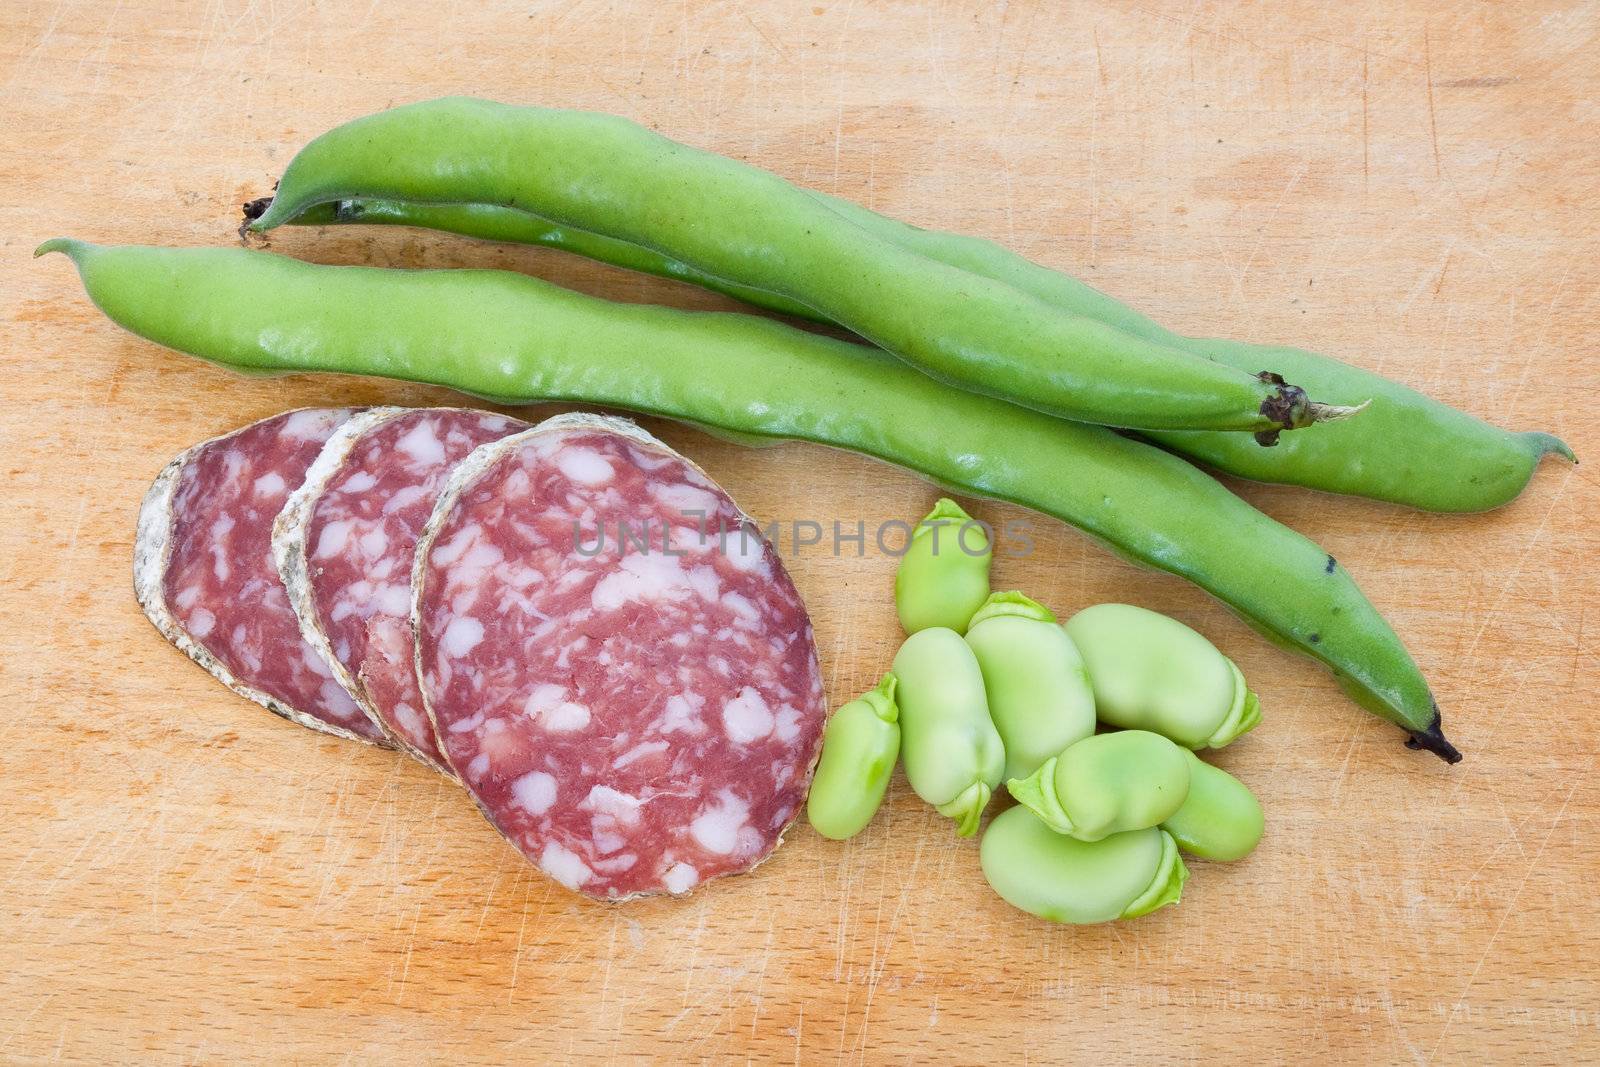 Three salami slices with fava beans on a wood chopping board